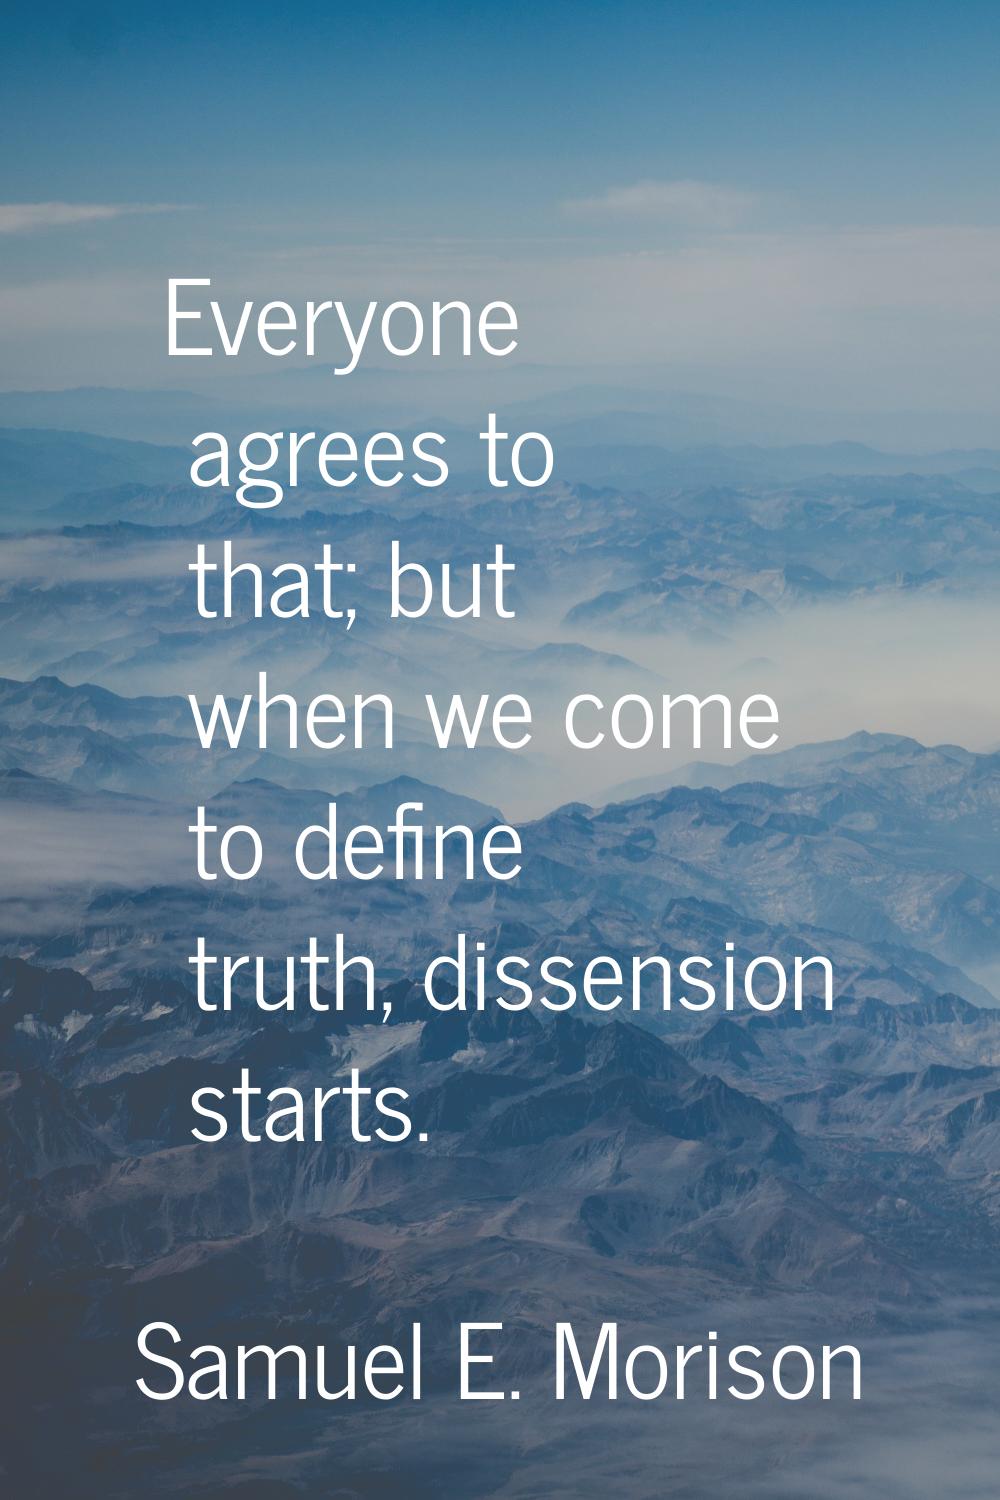 Everyone agrees to that; but when we come to define truth, dissension starts.